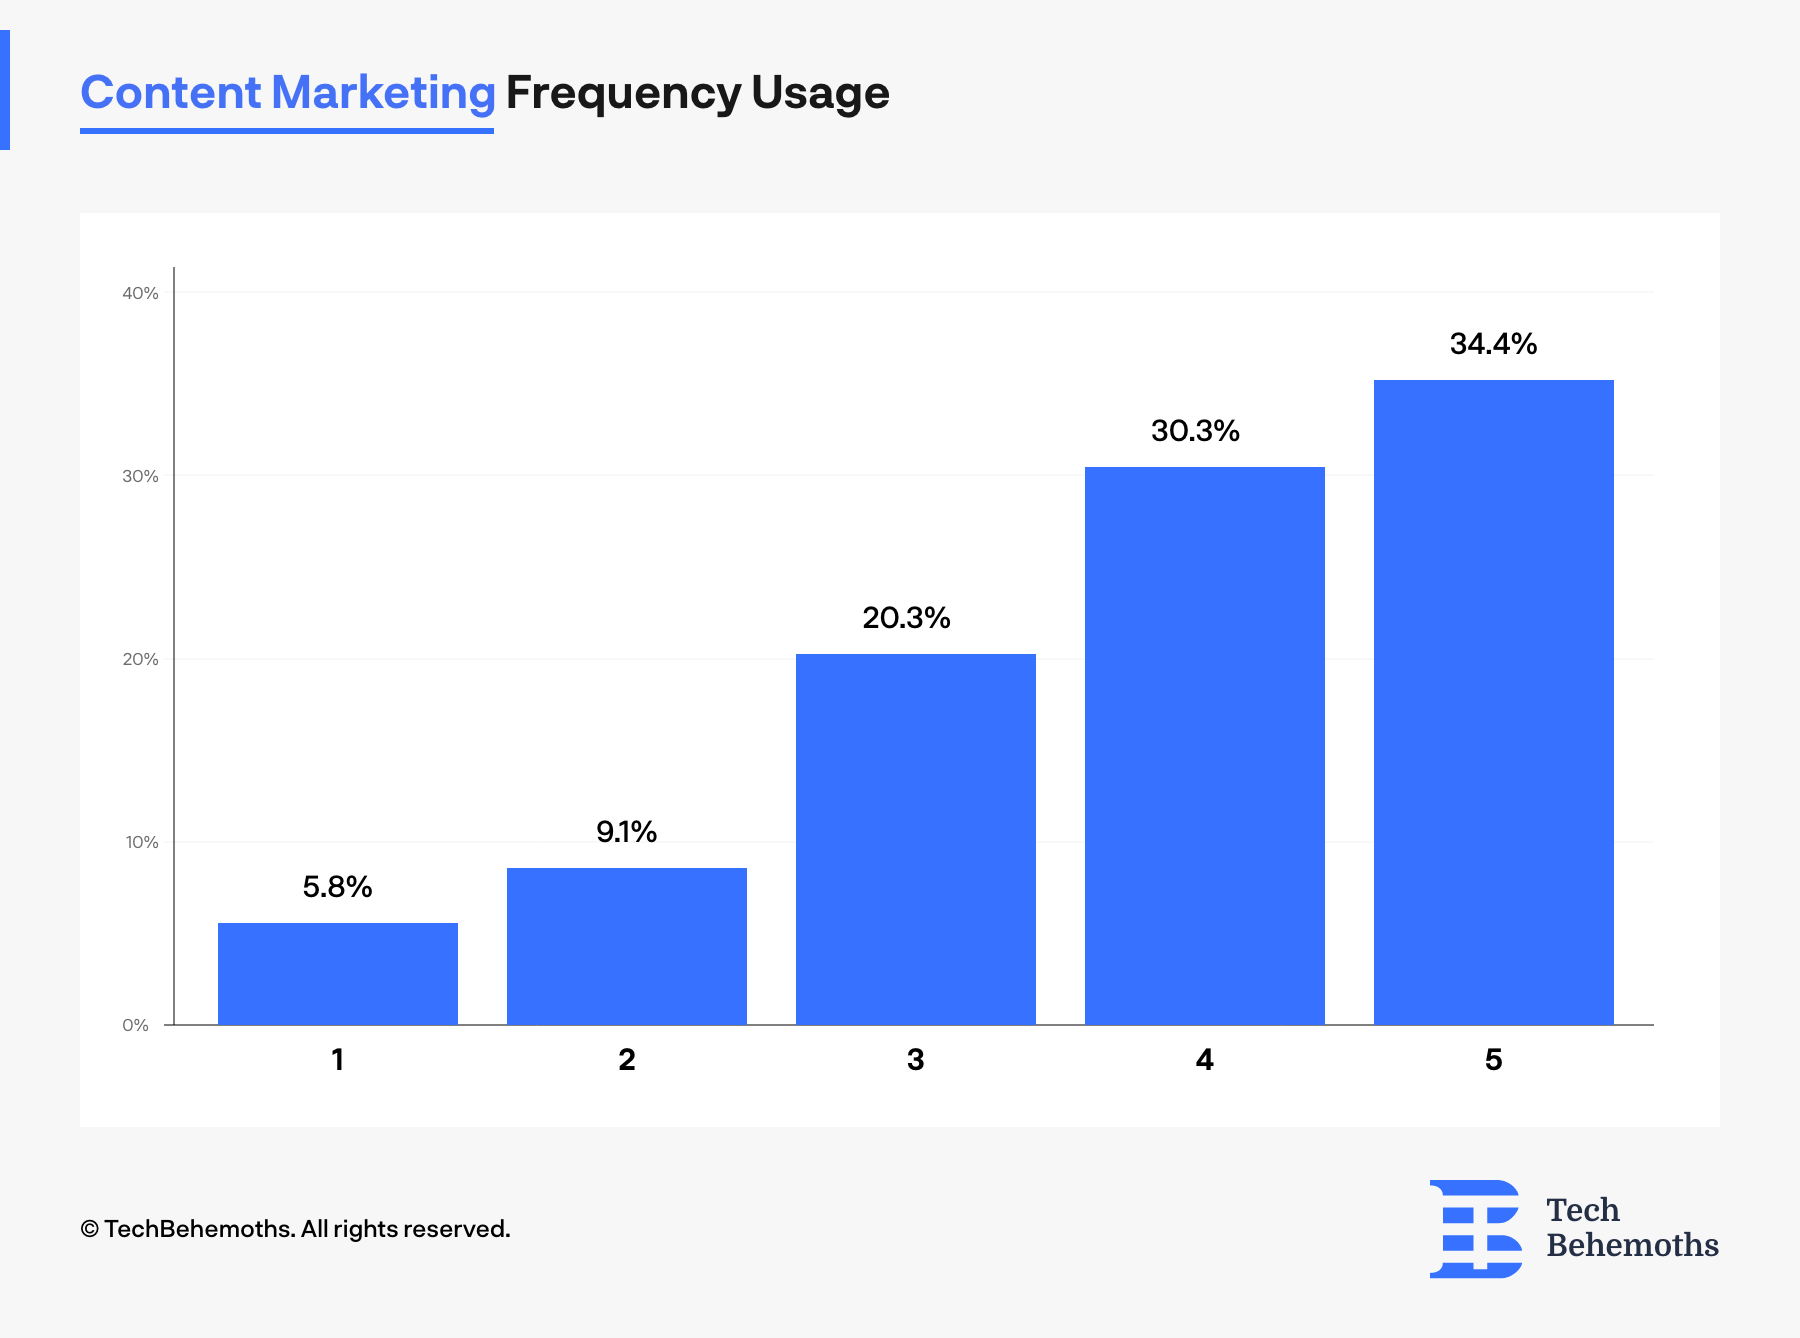 How frequent, on a scale of 1 to 5 IT companies and digital agencies use content marketing